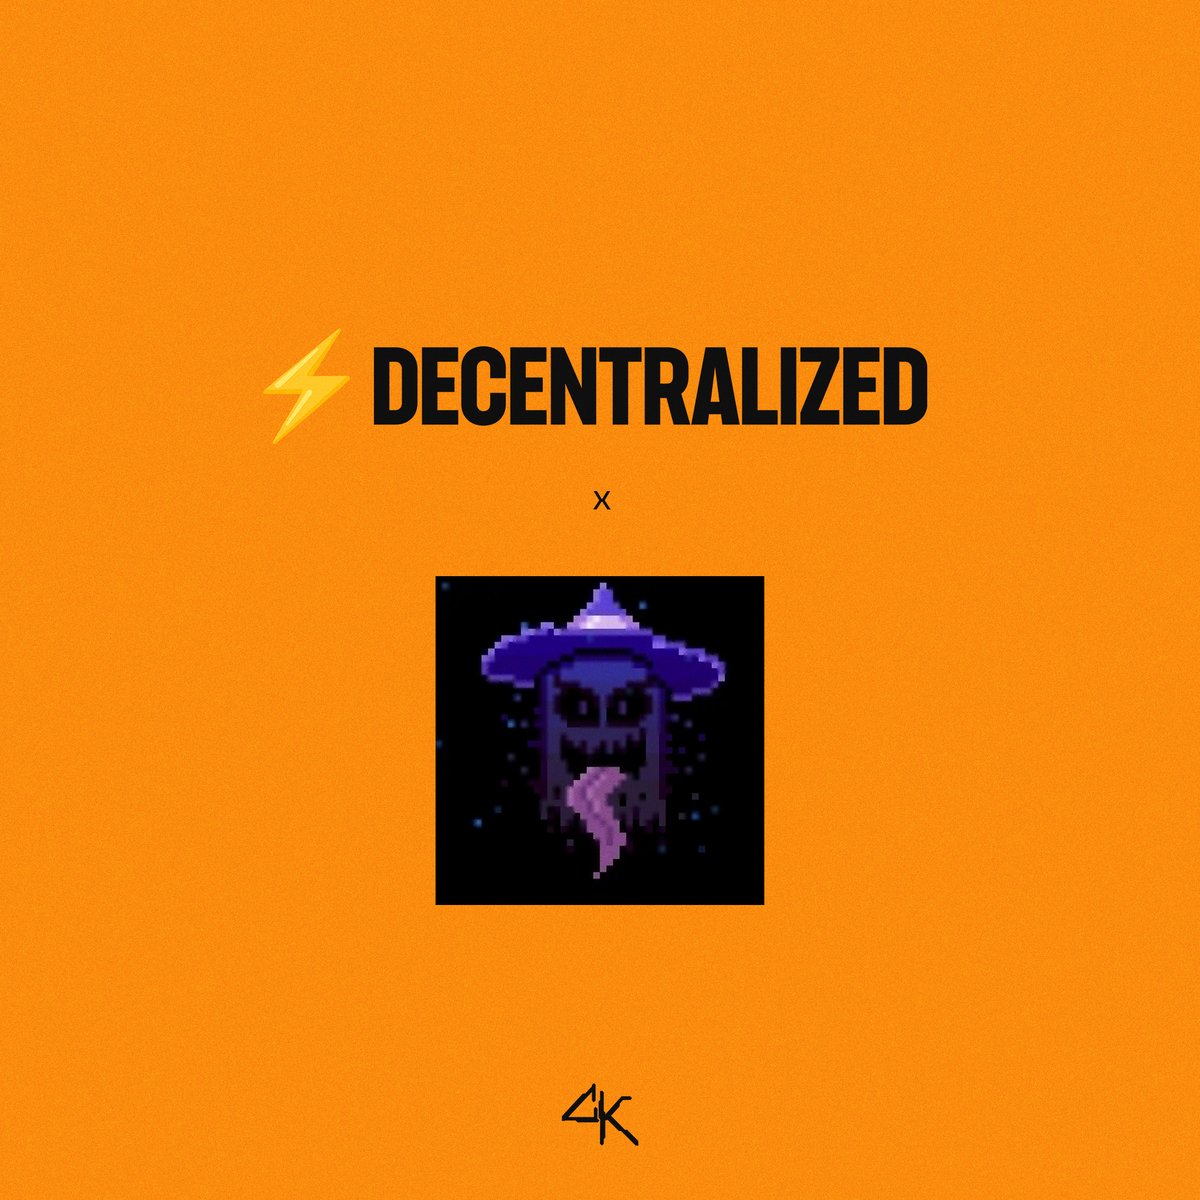 Welcome to ⚡️DECENTRALIZED, @theshadowhats.